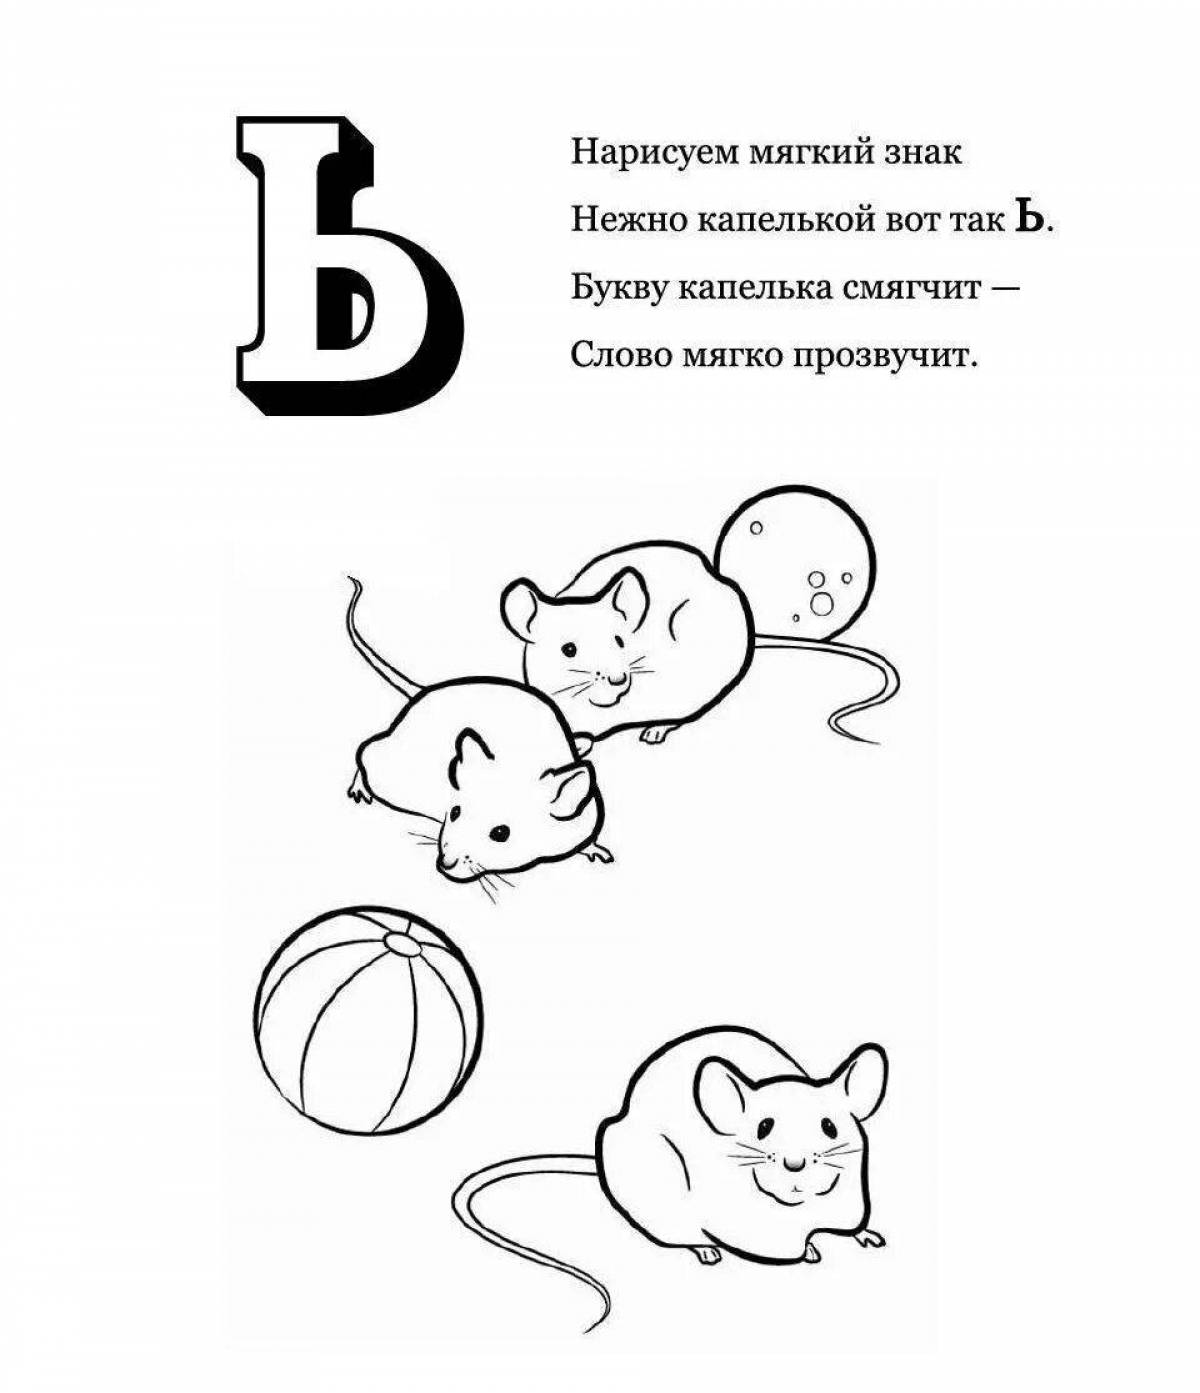 Colorful bright signs ъ and ь coloring book